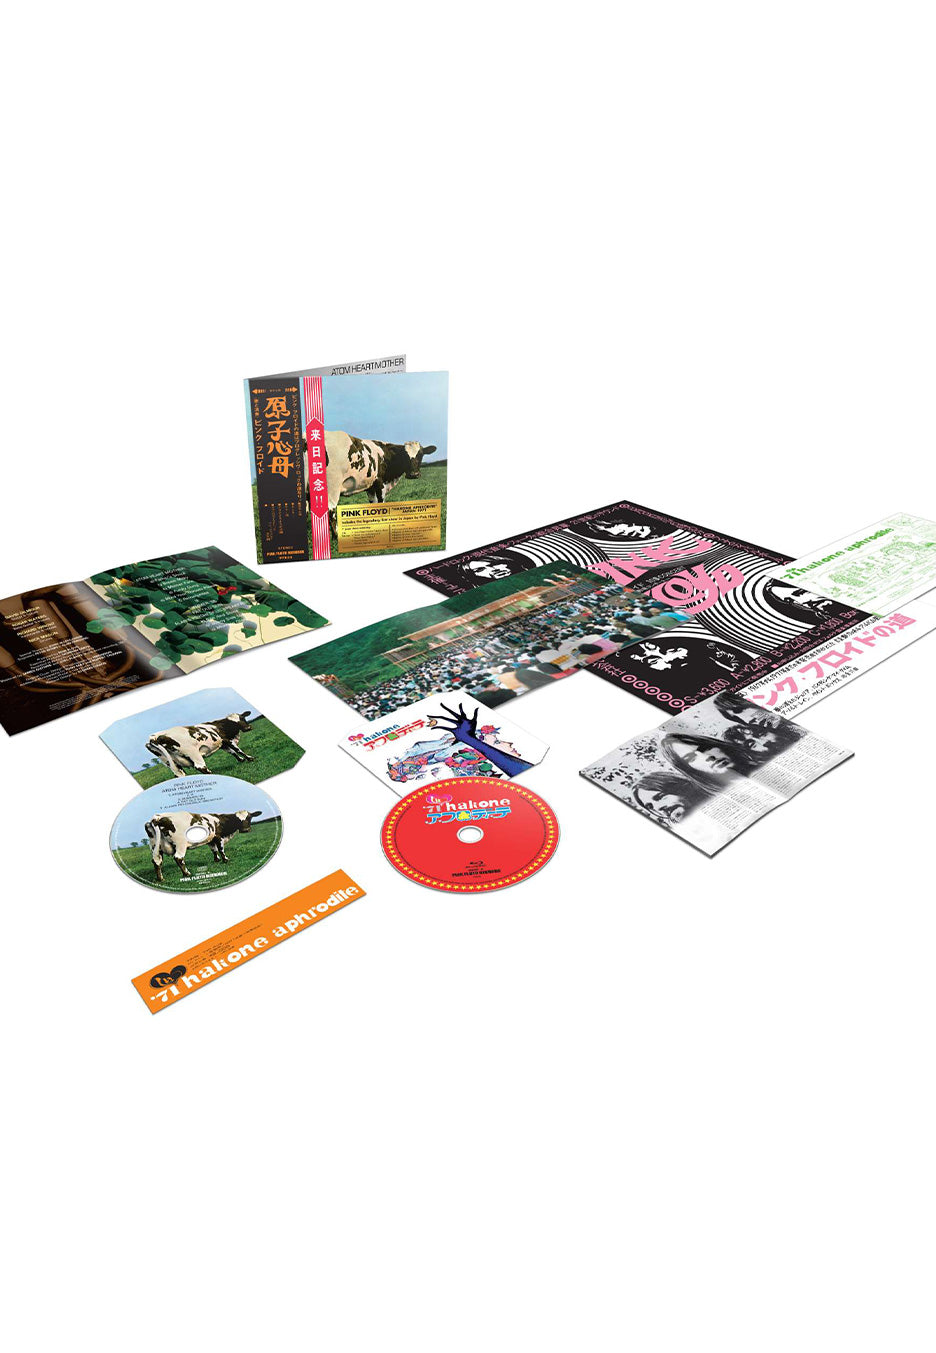 Pink Floyd - Atom Heart Mother (Special Limited Edition Japan 1971) - Digipak CD + Blu Ray